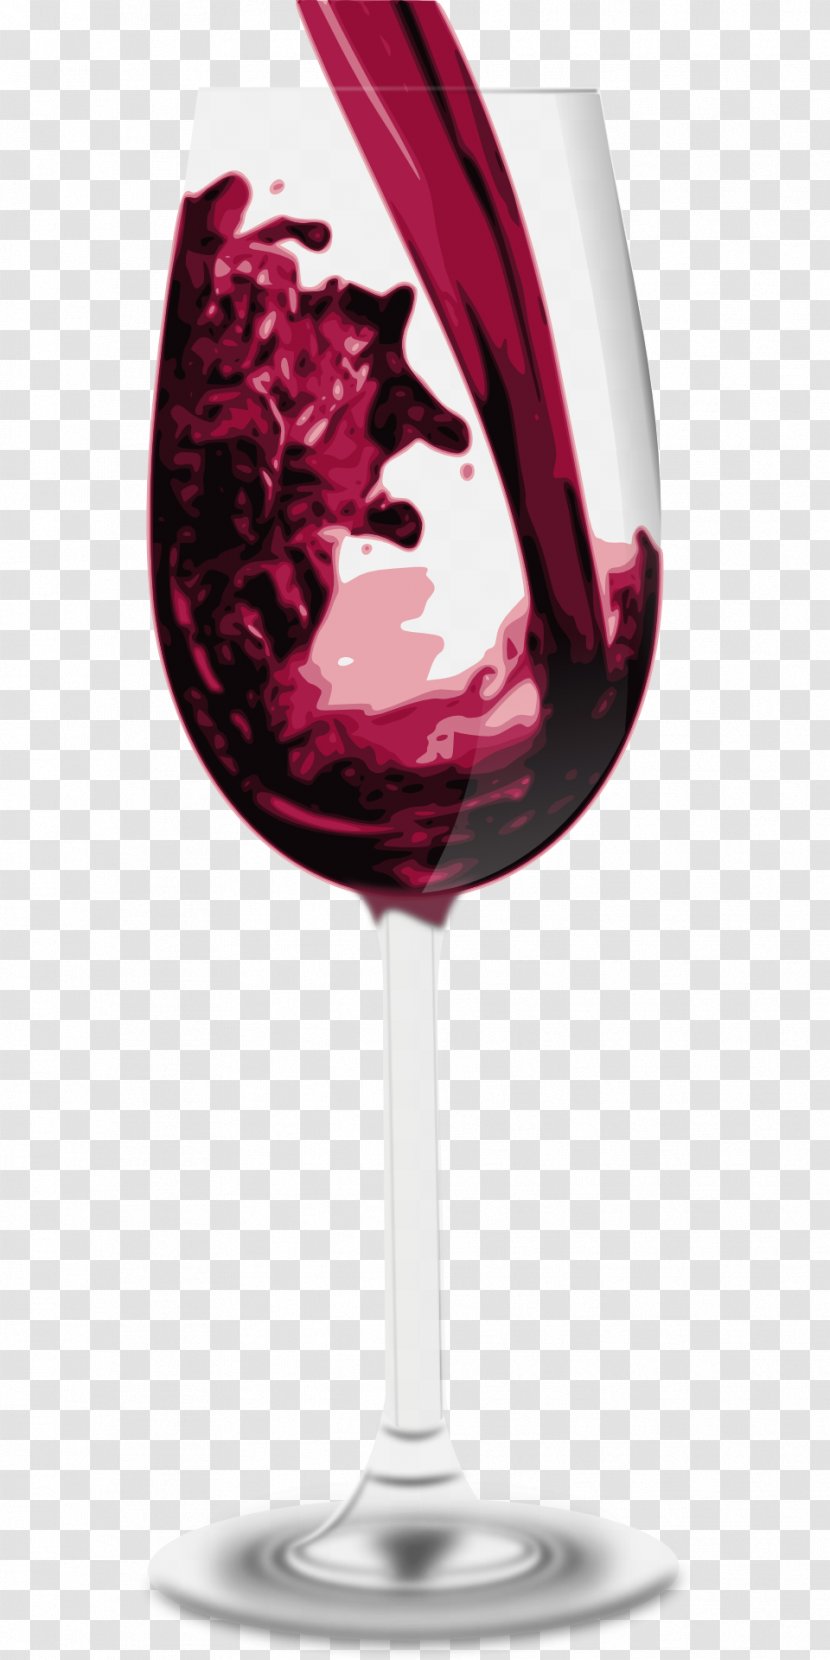 Red Wine White Champagne Cocktail - Stemware Transparent PNG